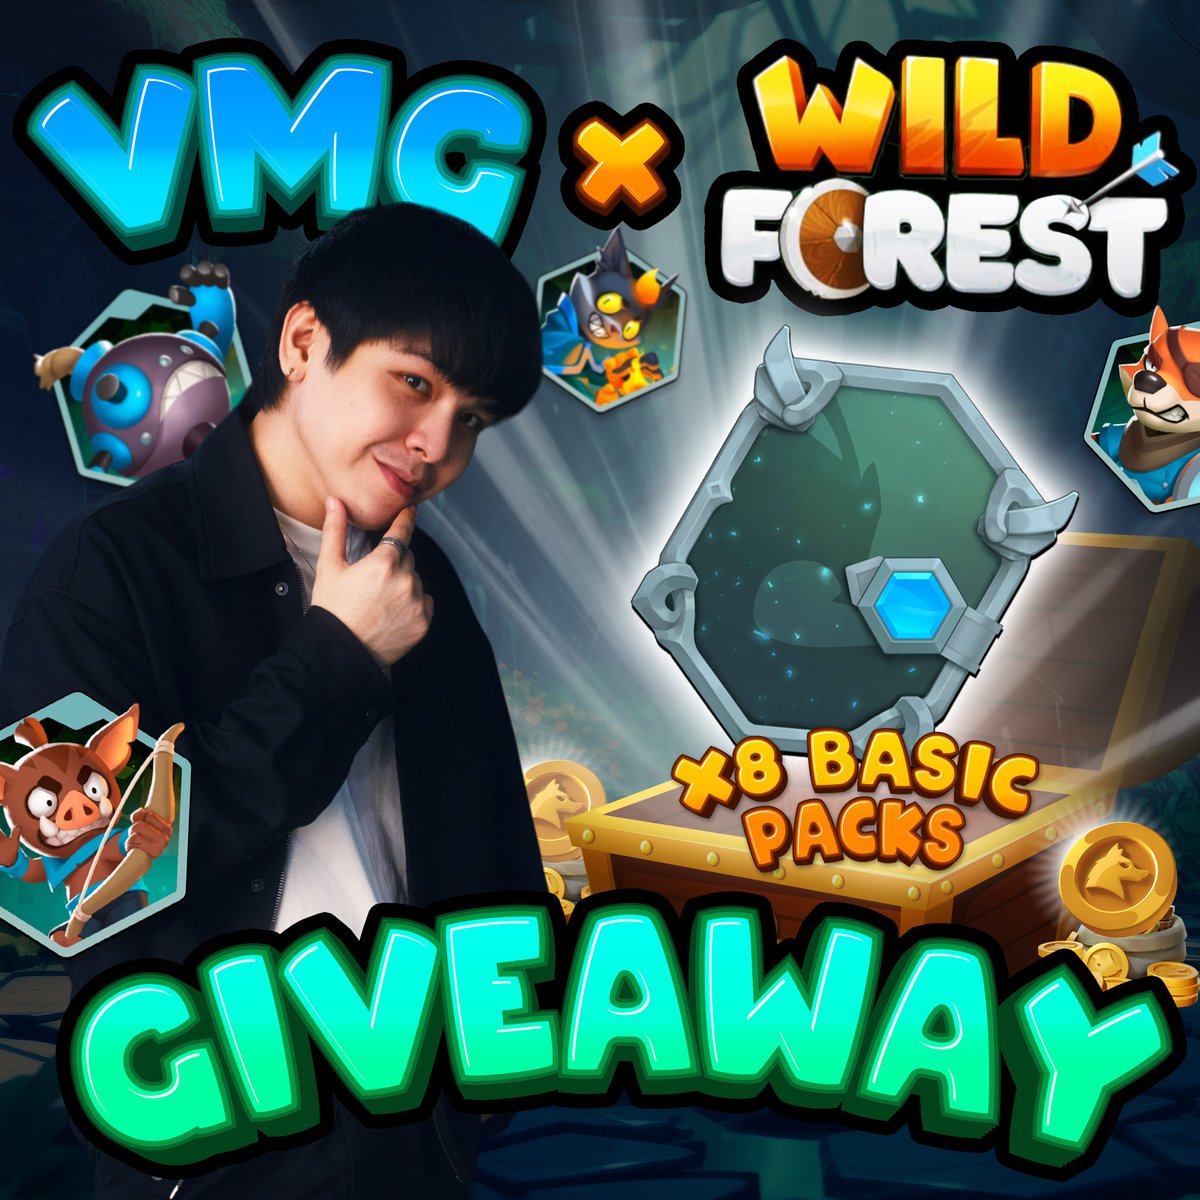 ⚔️ VMG x Wild Forest Giveaway ⚔️

Let's celebrate the start of Wild Forest's Season 7! Get a chance to win 8x Basic Packs (43 $RON / $110+ each) 👇

1️⃣ Follow @playwildforest & @vmiguelg
2️⃣ Like + RT this post 🔄
3️⃣ Join their discord: discord.com/invite/playwil…

Once all steps are…